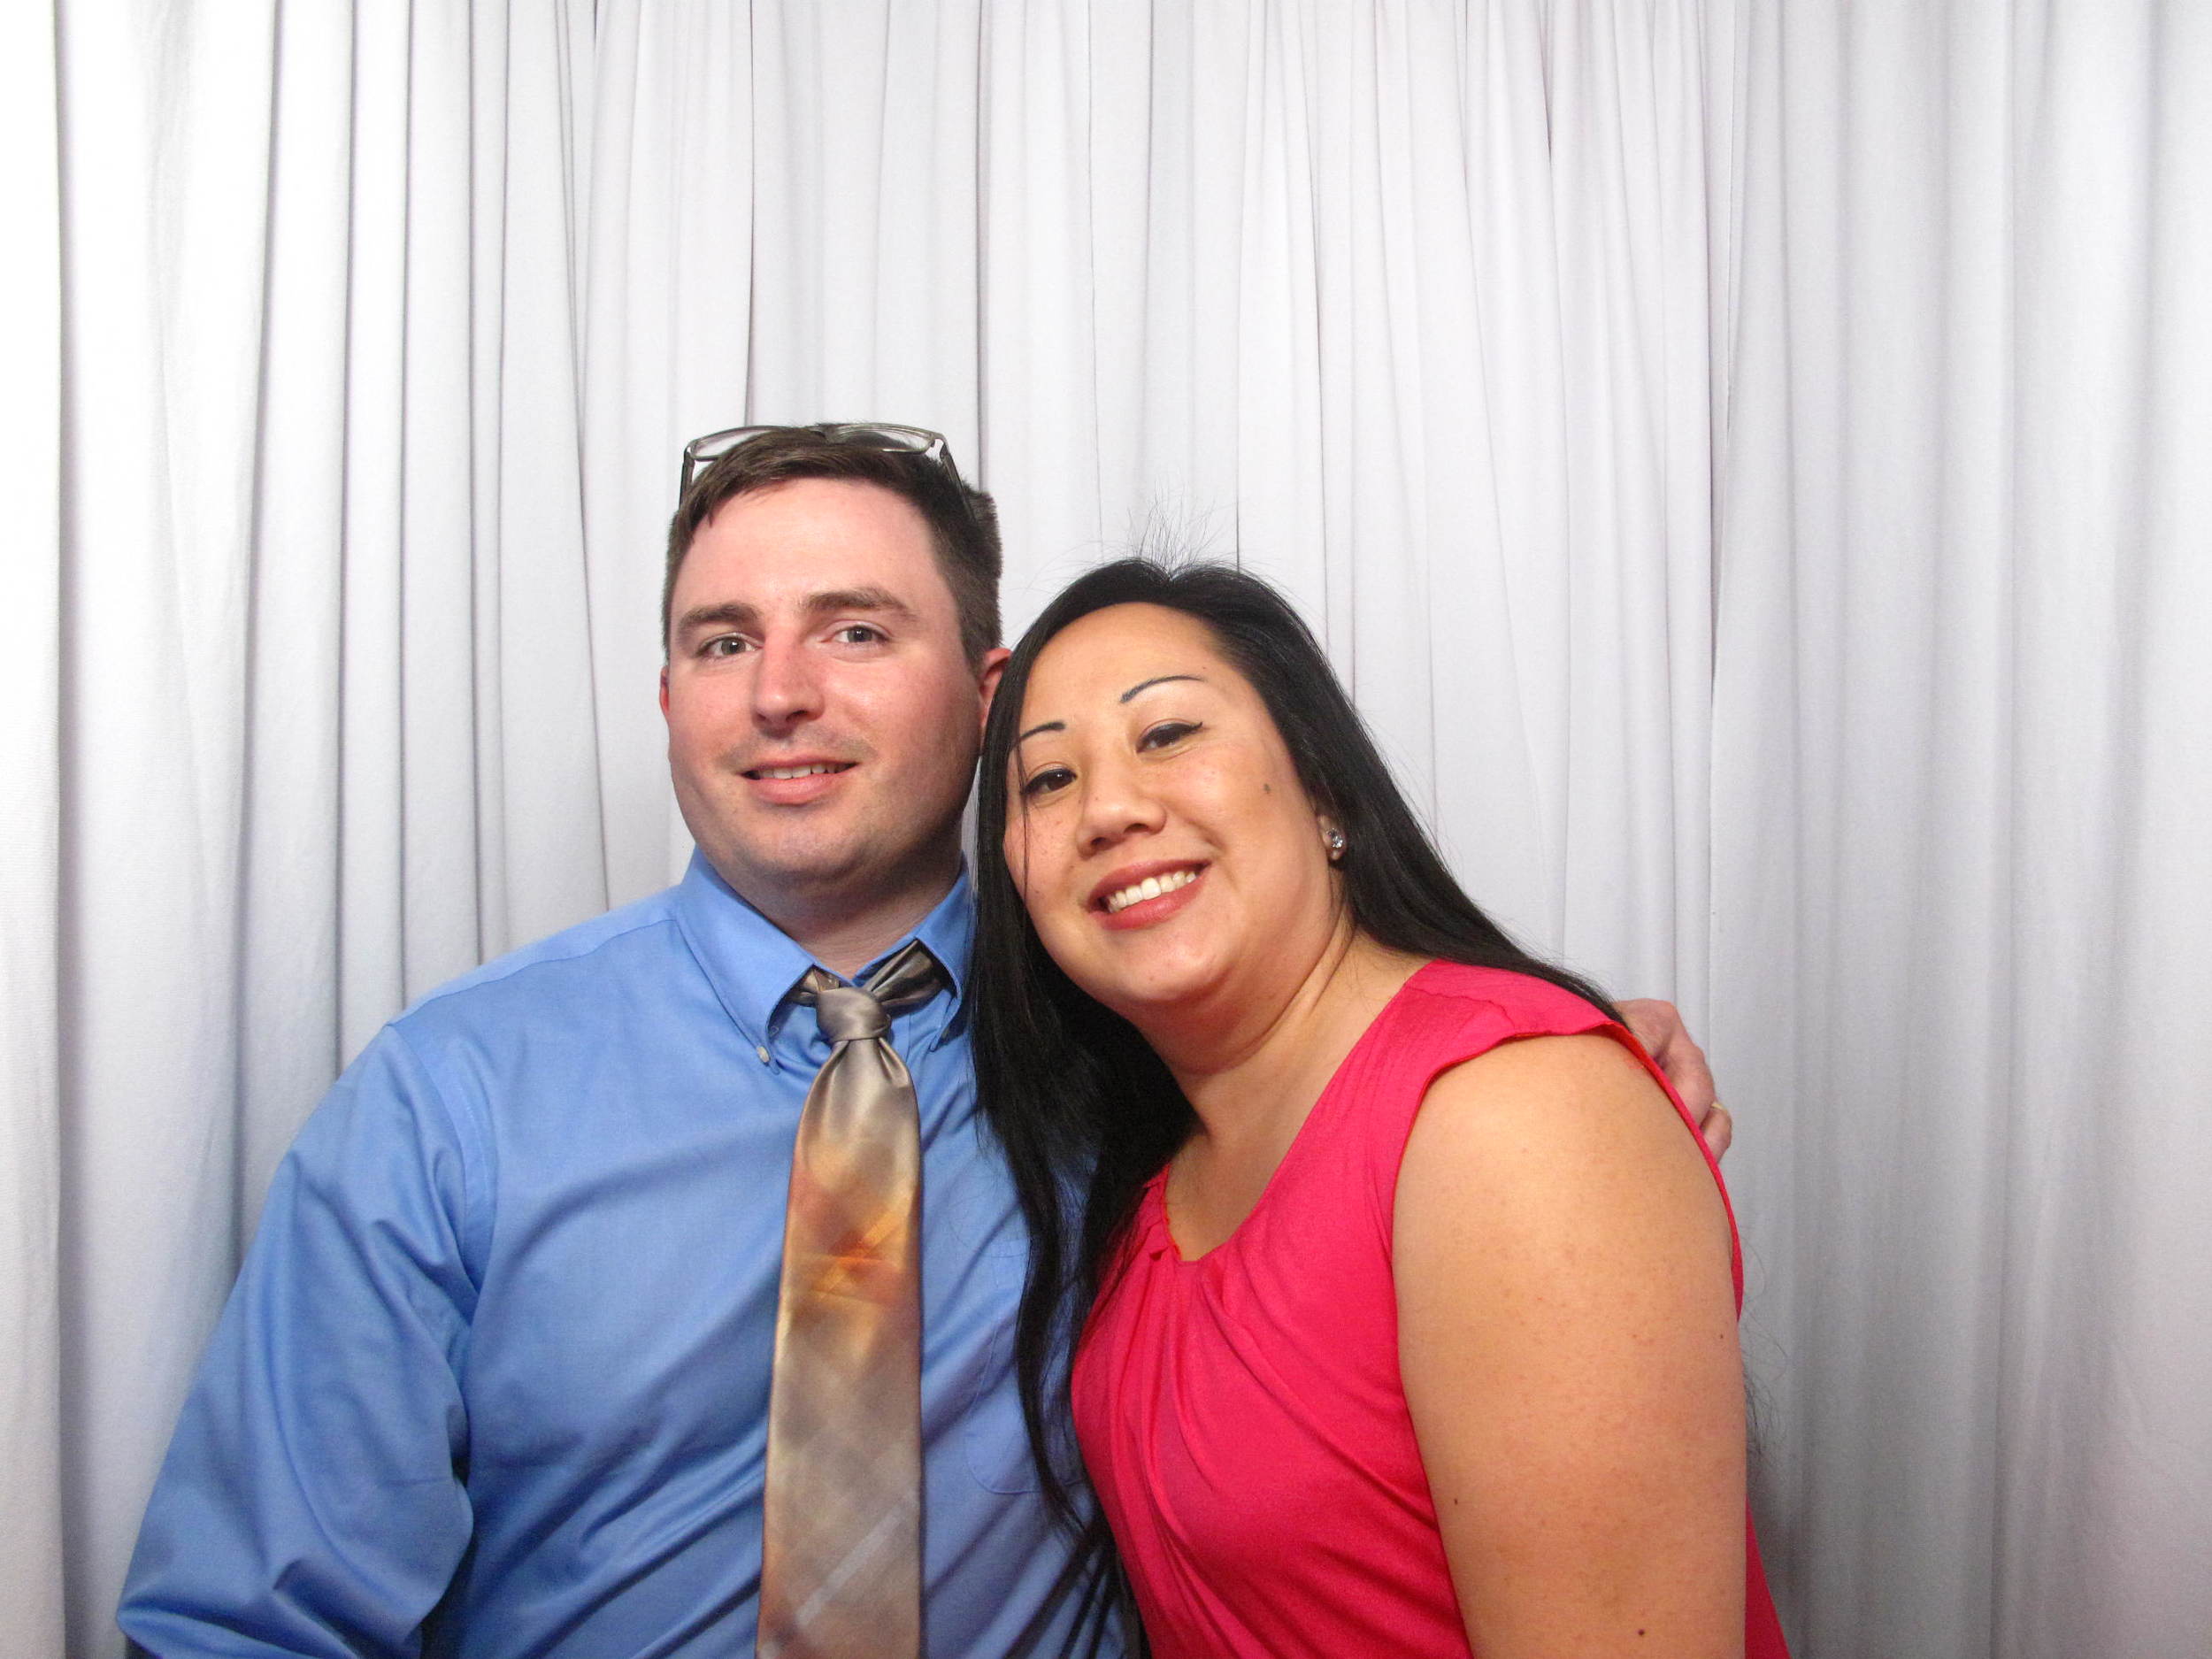 Snapshot Photobooths at the Quality Inn in Toms River, NJ